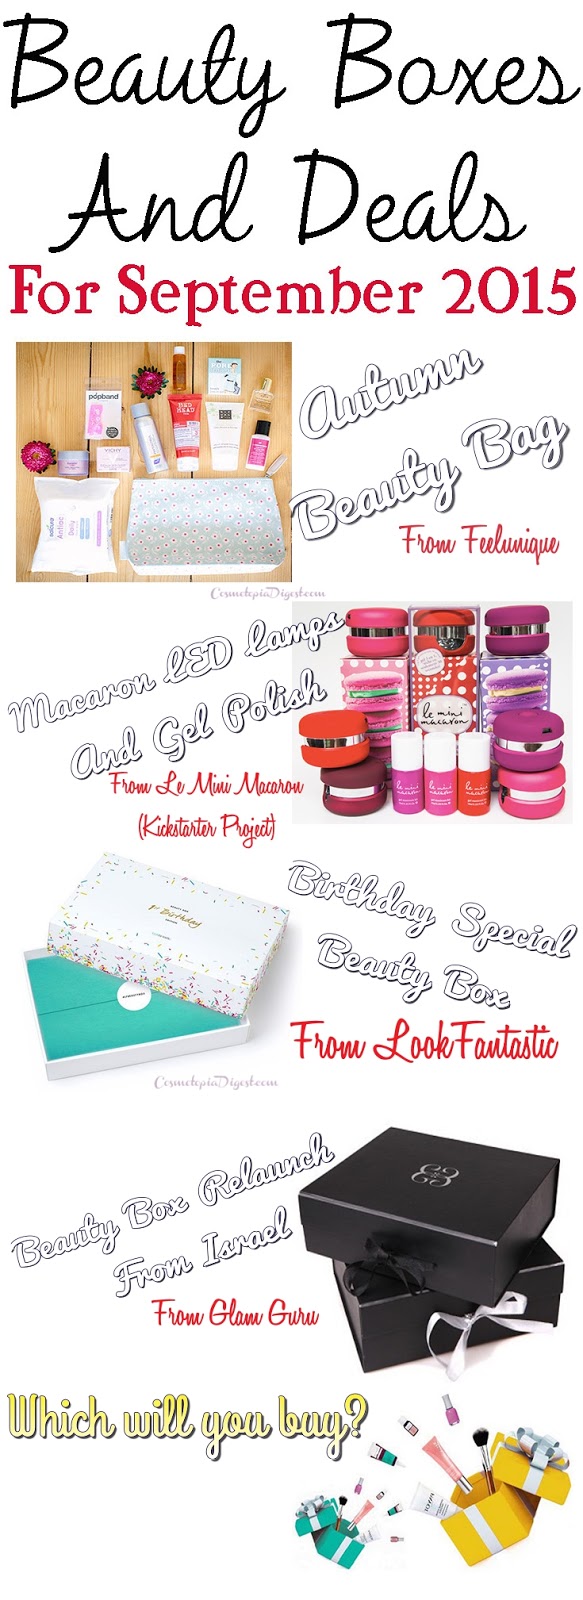 Special Beauty Boxes and Offers For September 2015